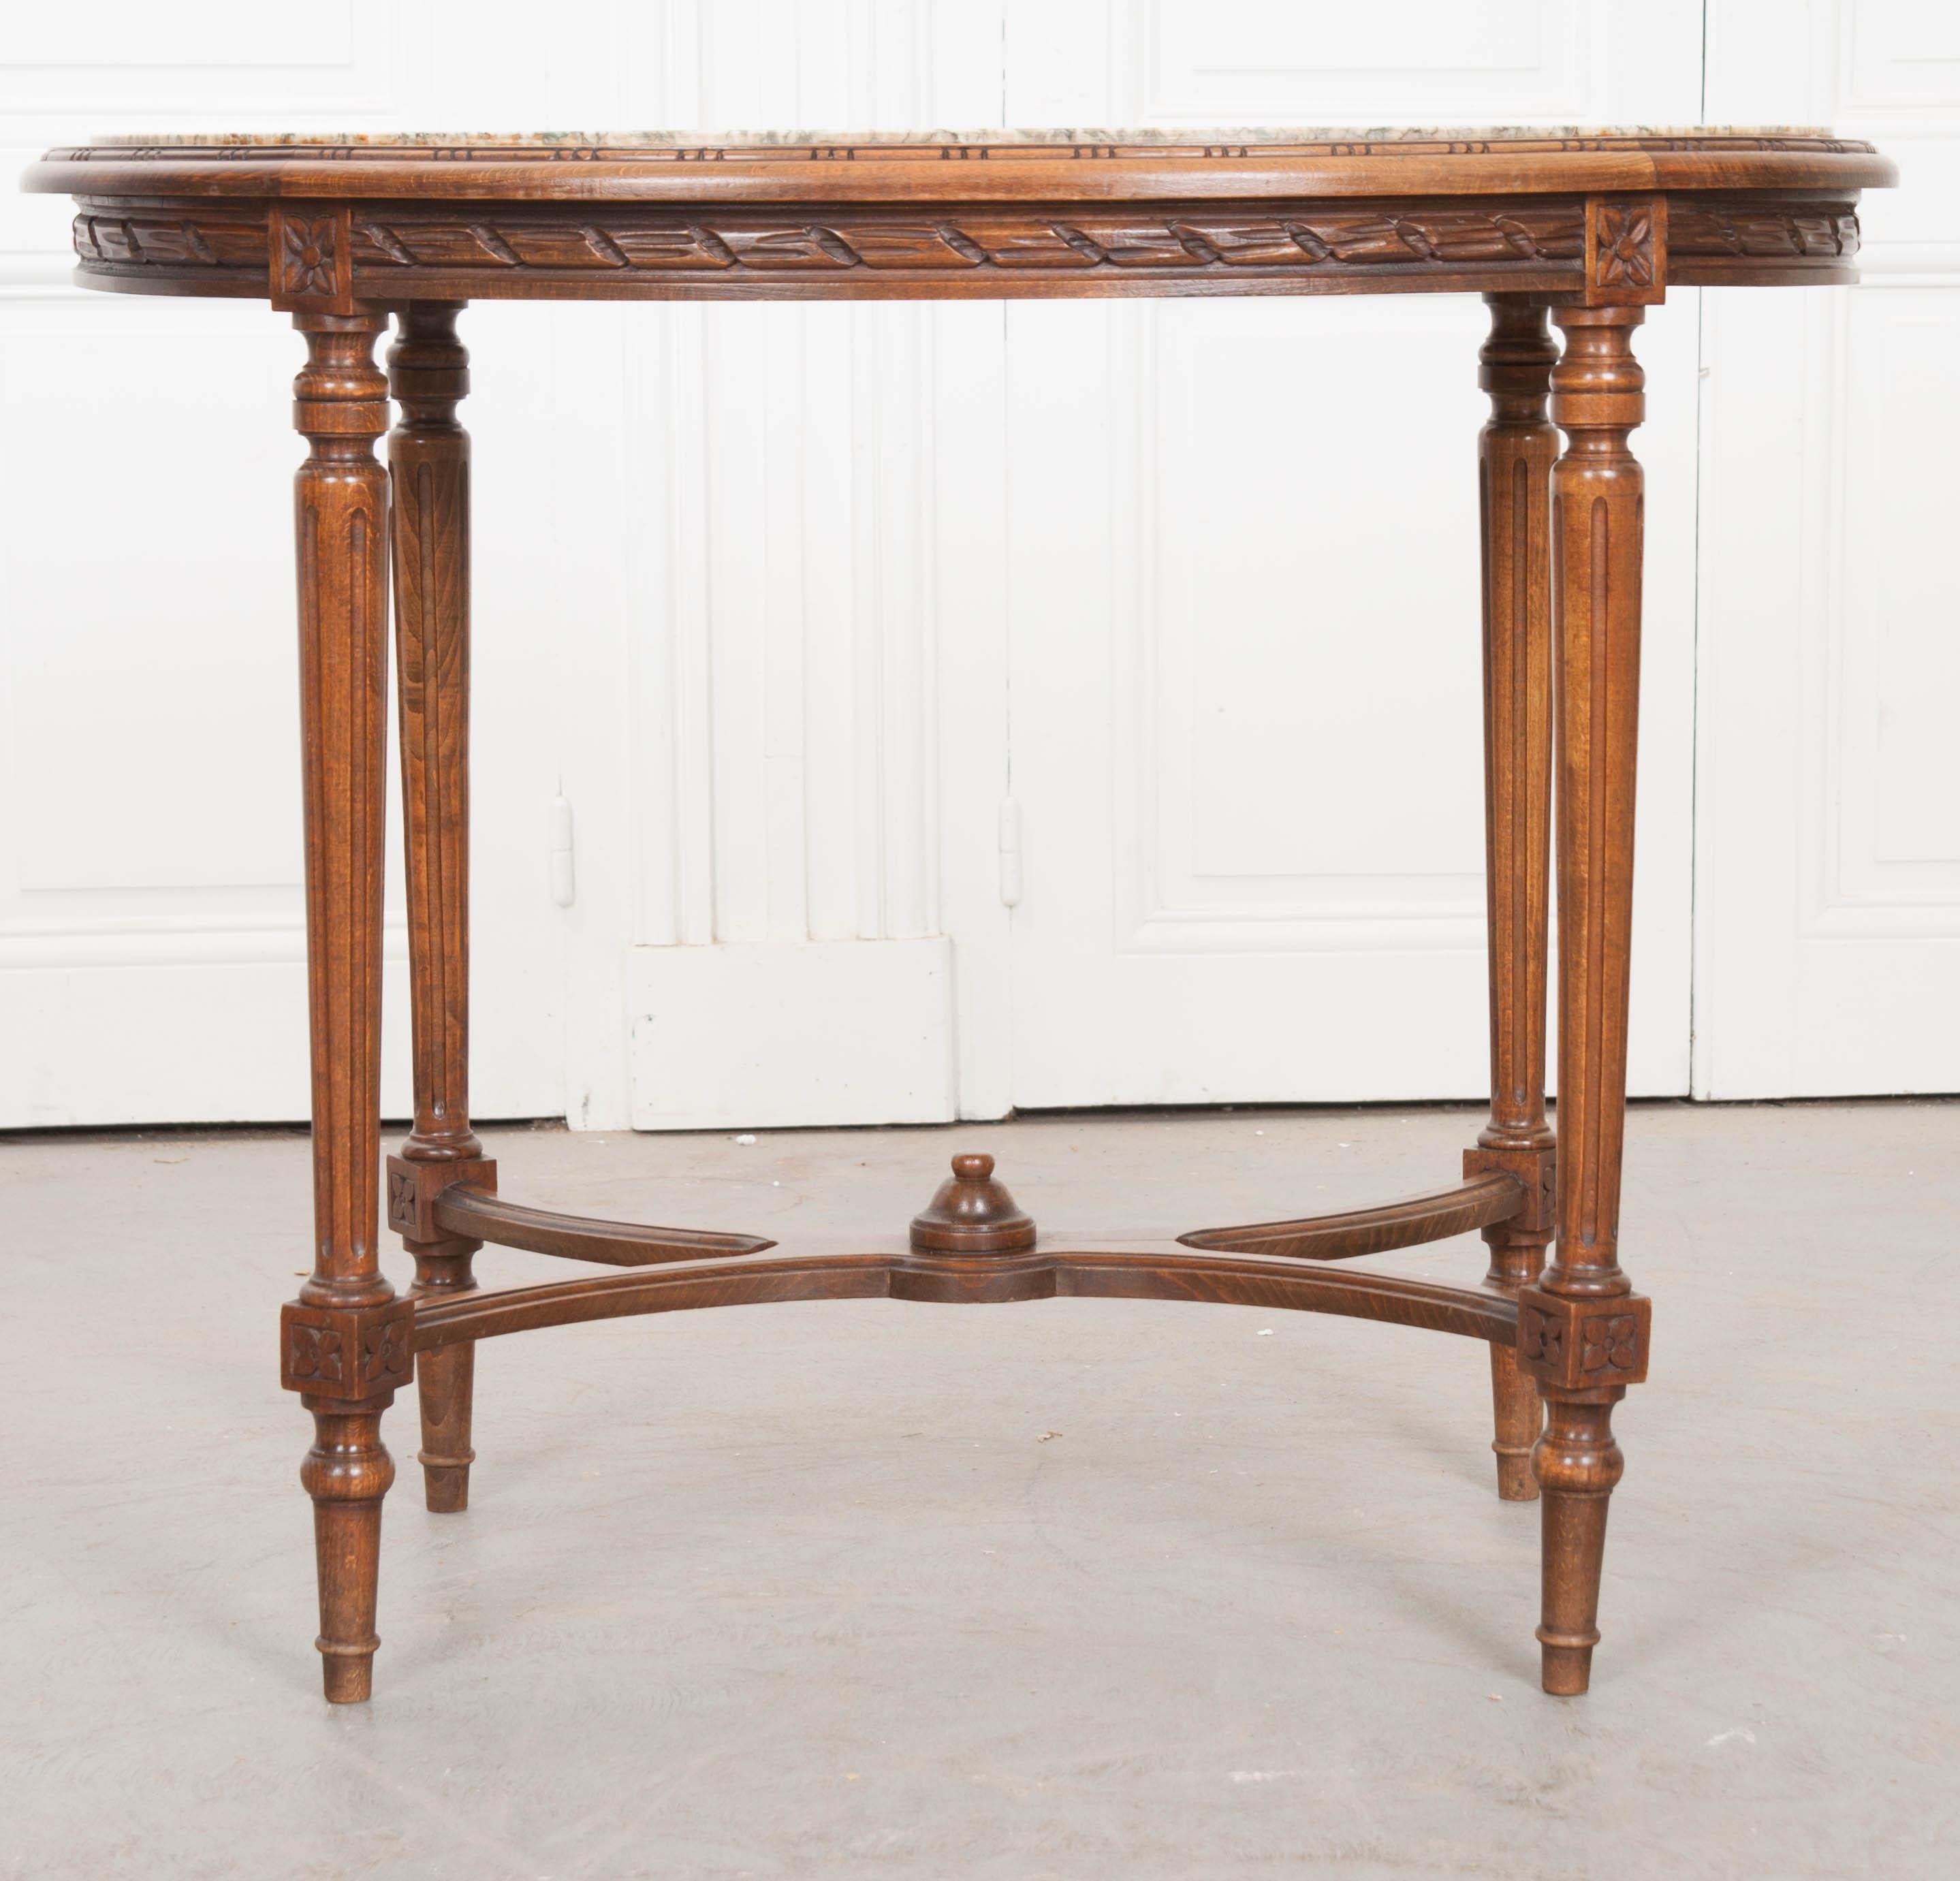 A spectacular French Louis XVI style oval marble-top table, made of hand carved oak from the 19th century. This beautiful antique features an oval shaped marble surface that is set into the top, and is in remarkable antique condition. The apron is